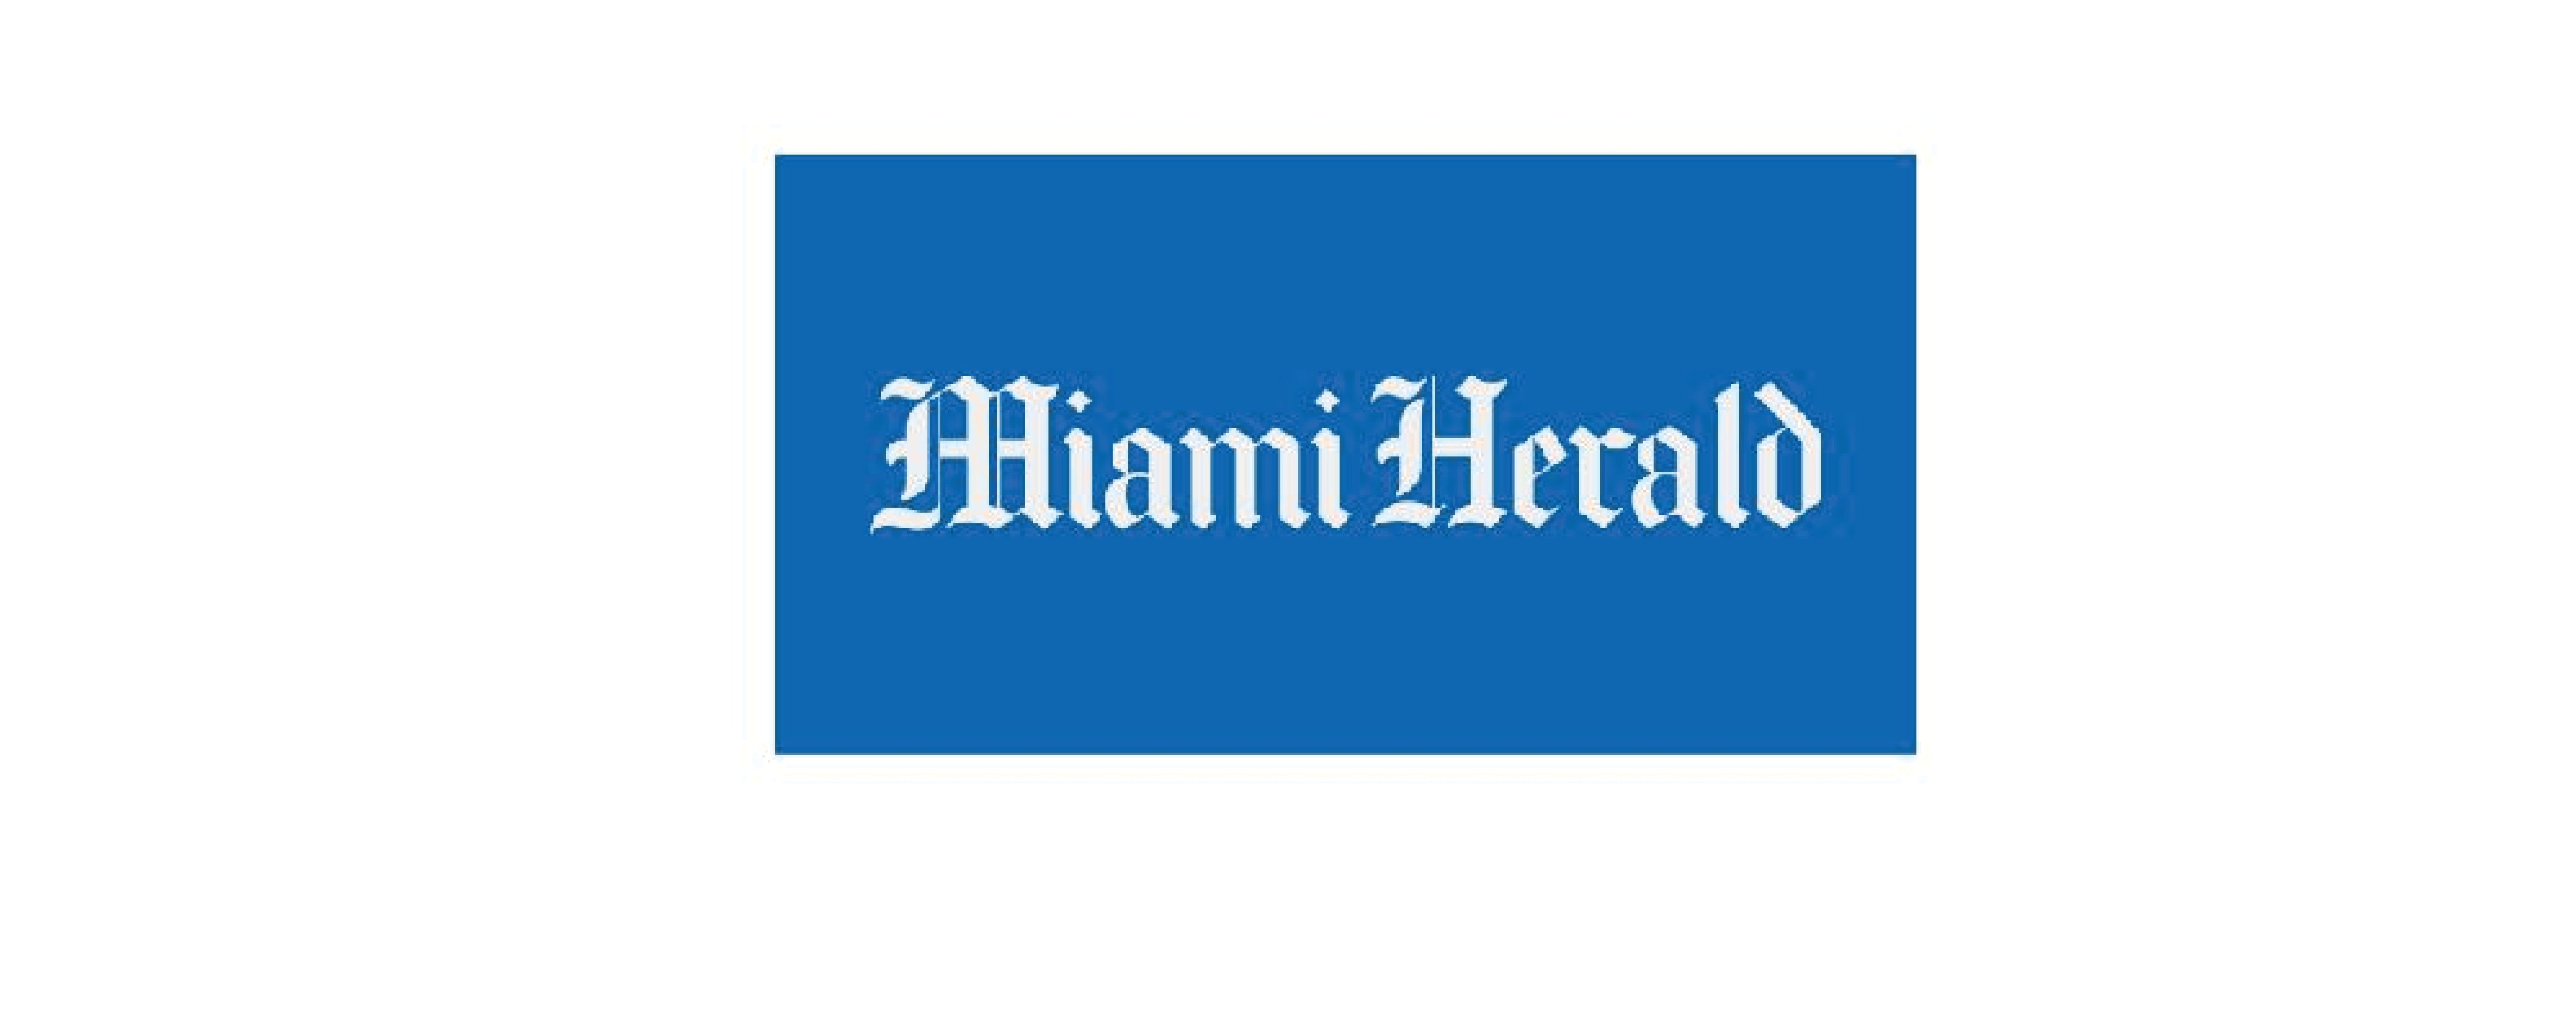 The Miami Herald - Spice Up Your Life at Miss Pepper